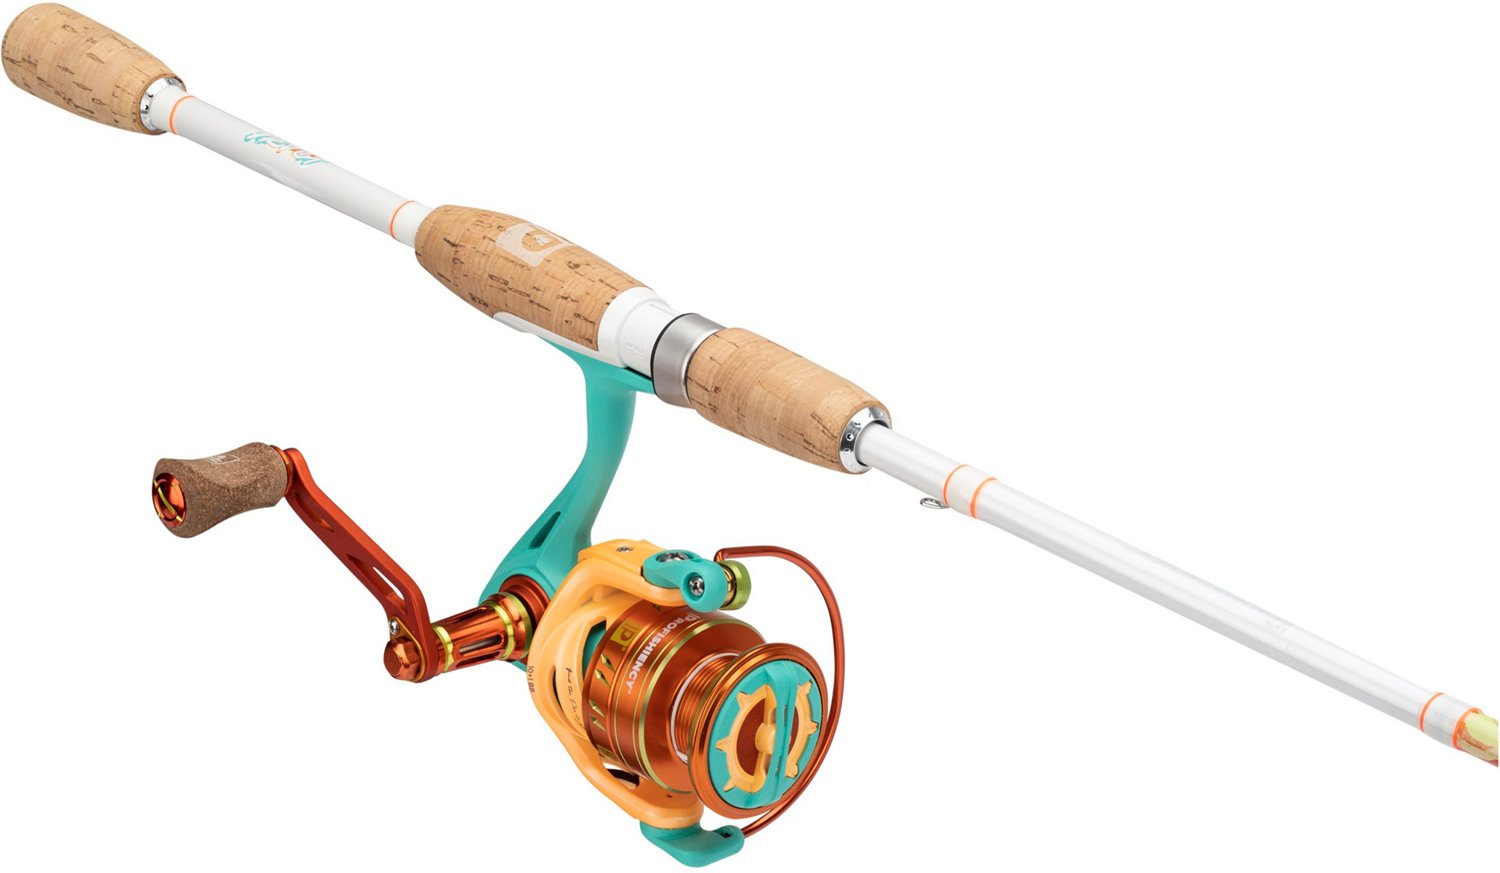 Academy Sports + Outdoors Pro Cat 7 ft Spinning Rod and Reel Combo